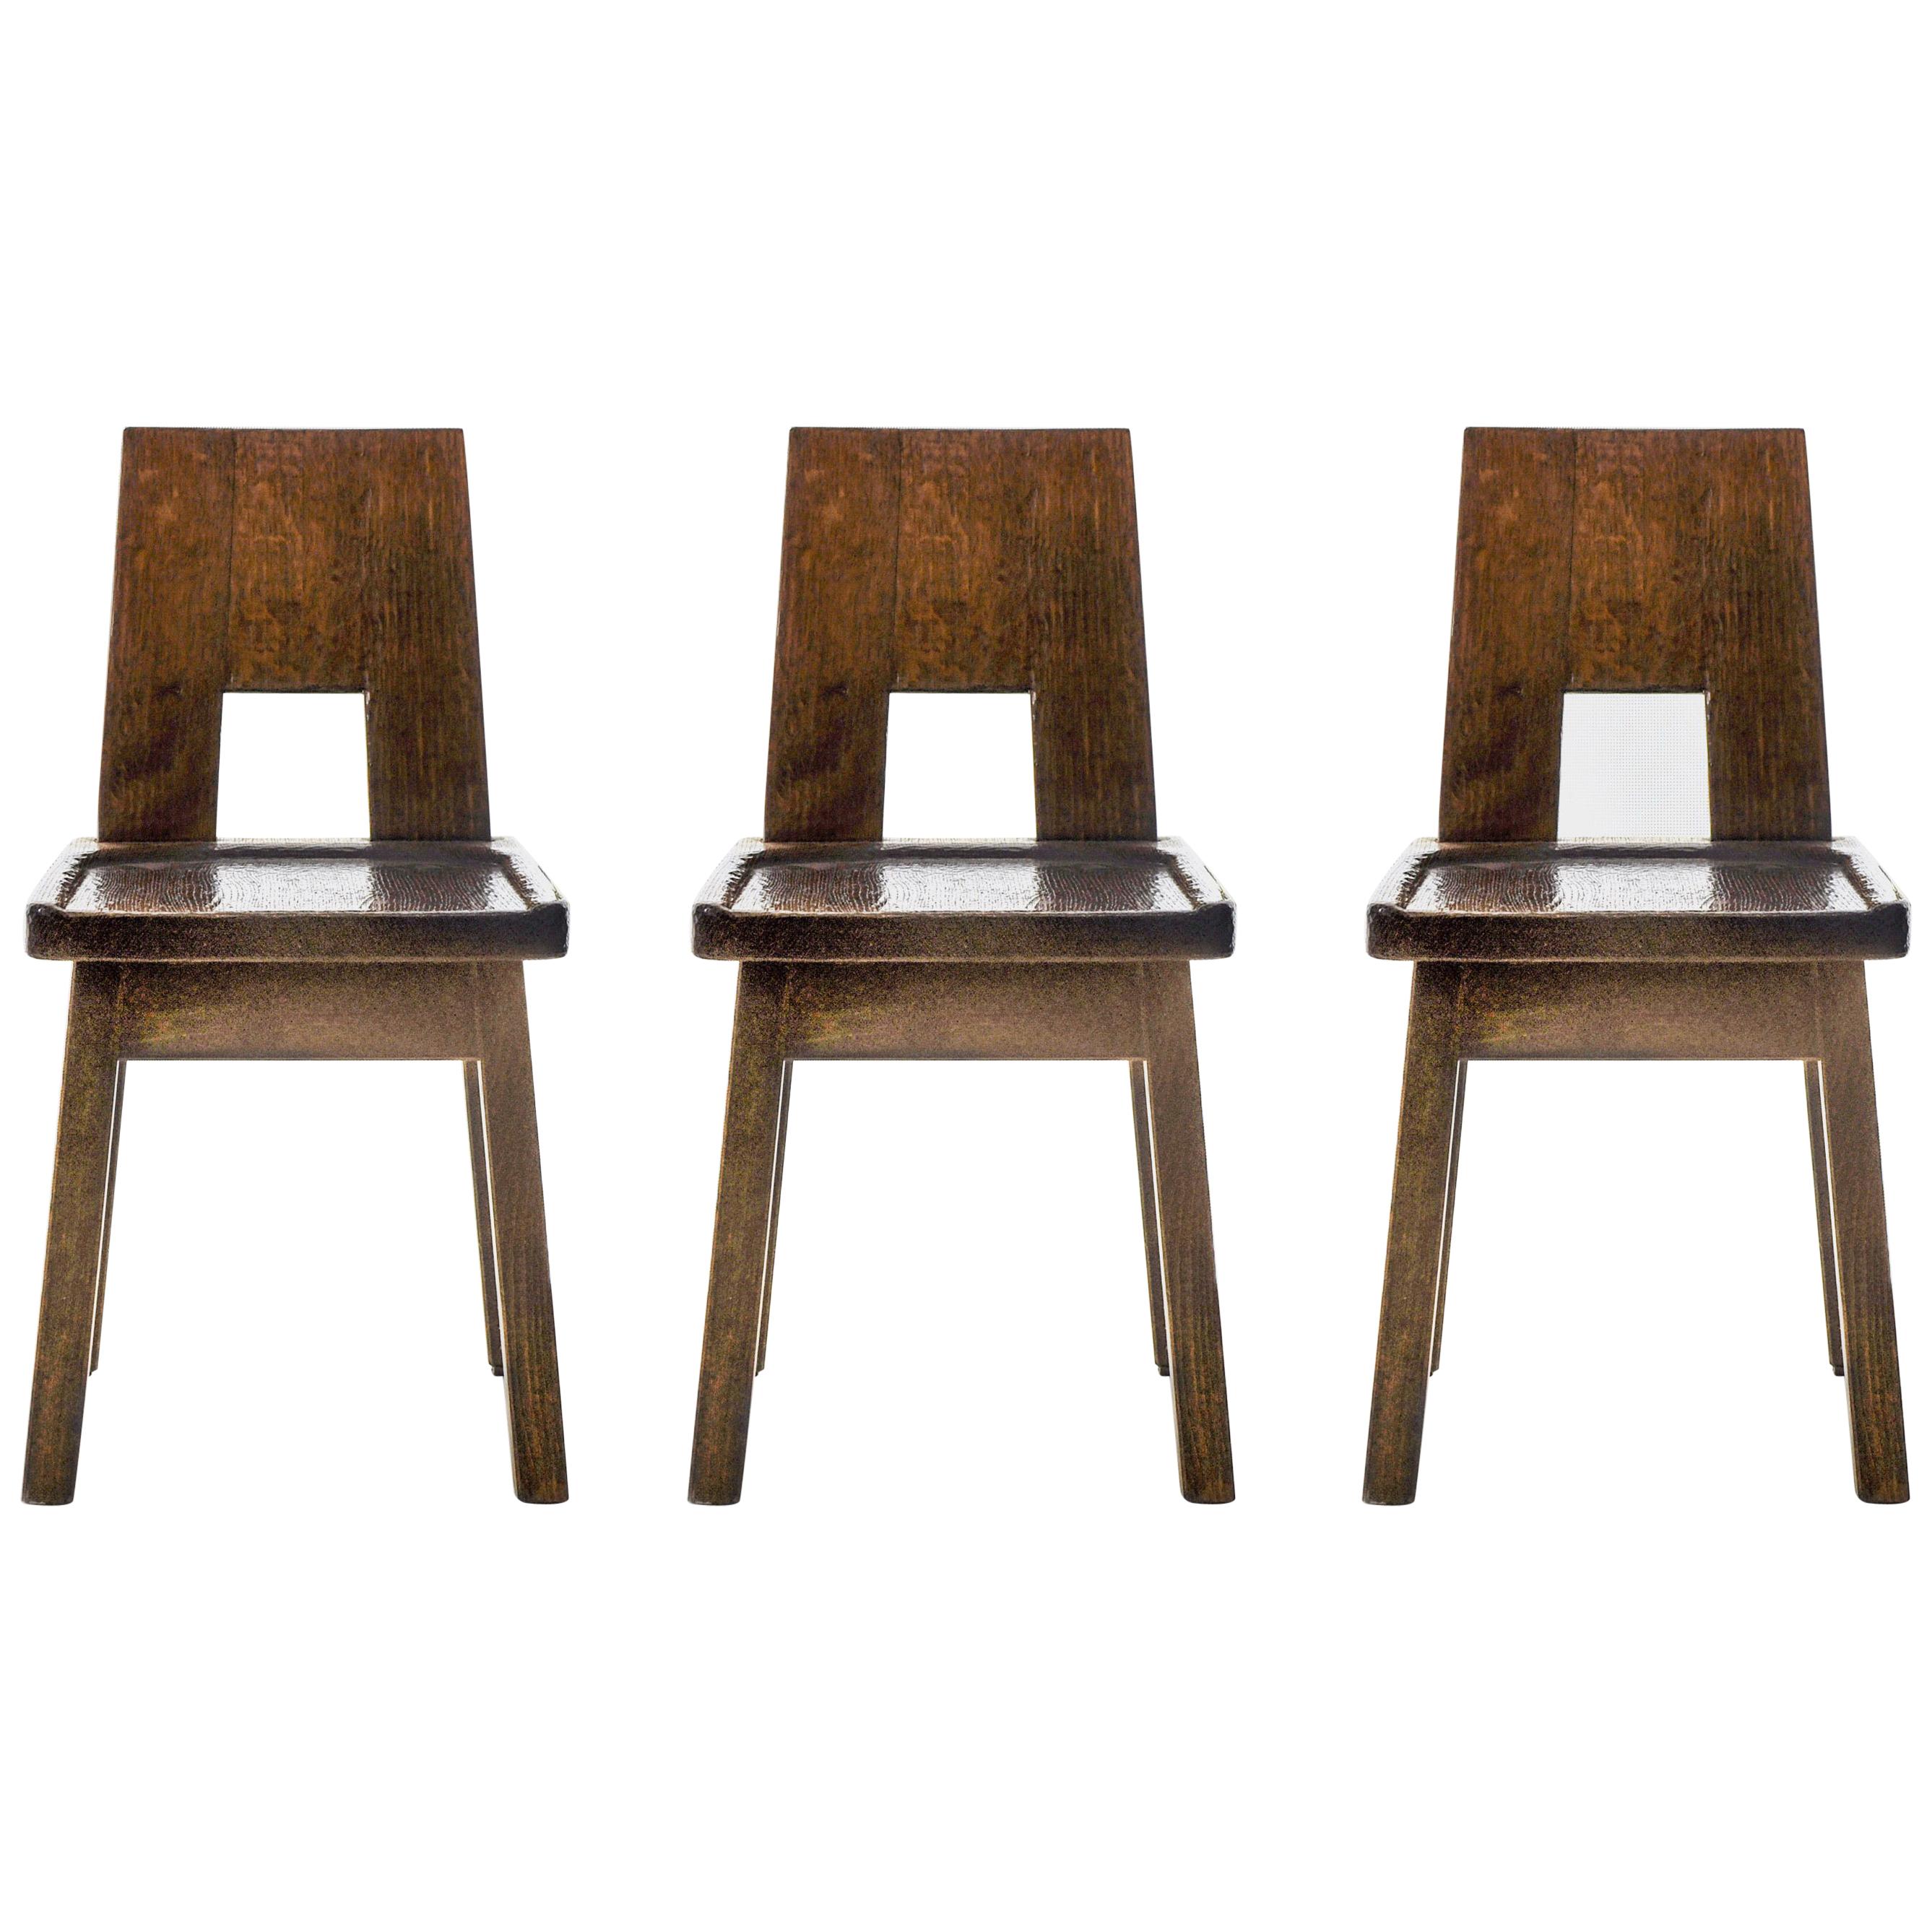 Hand Carved, Brutalistic Chairs Made of Solid Oak